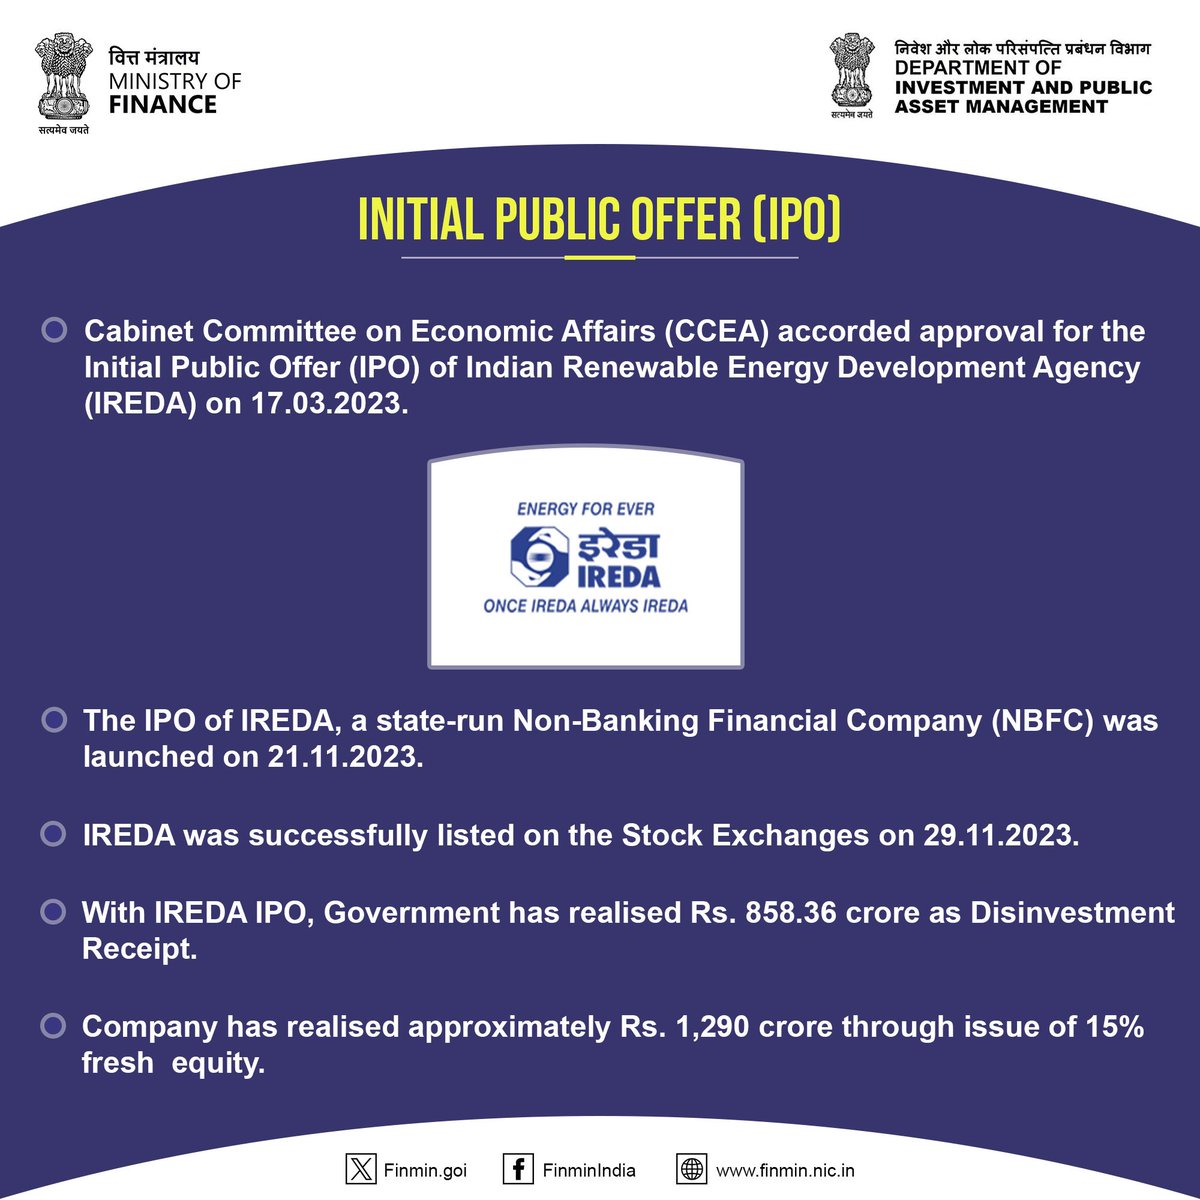 IREDA successfully listed on the stock exchanges on 29th November 2023 with Government realising Rs. 858.36 crore as disinvestment receipt

#ViksitBharat
#FinMinReview2023